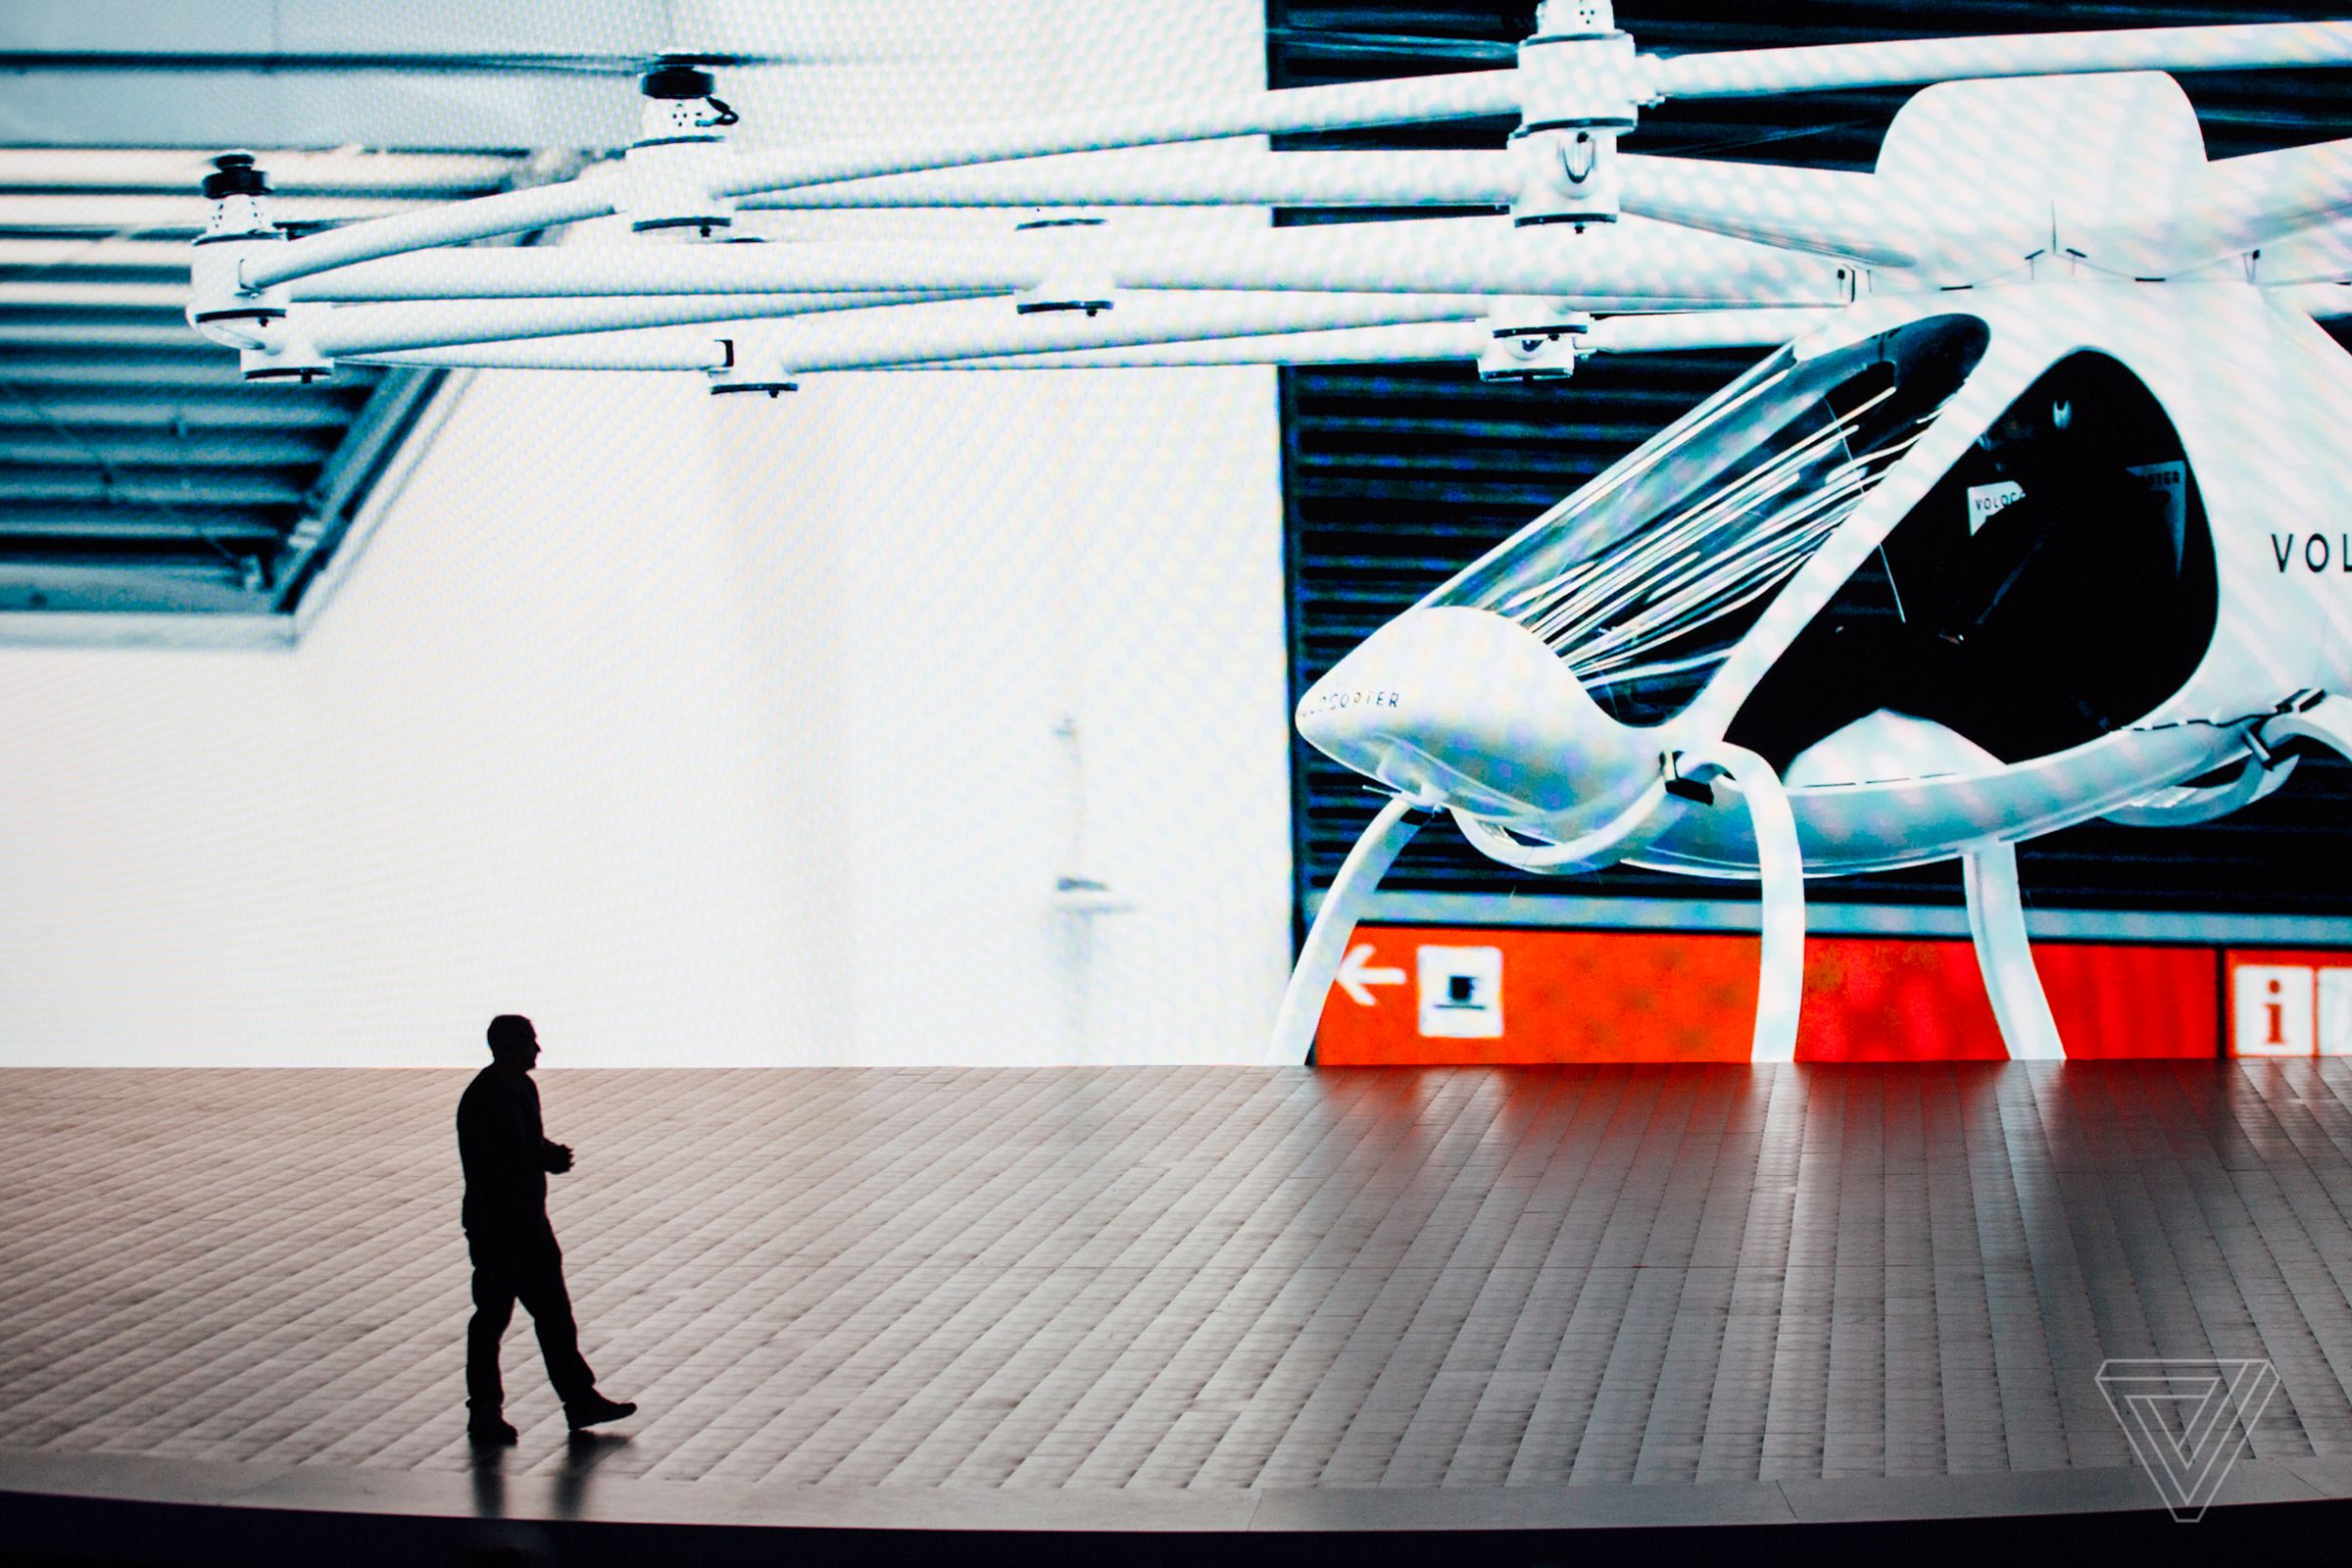 Krzanich introduces the Volocopter during rehearsal, one of the highlights of the keynote.